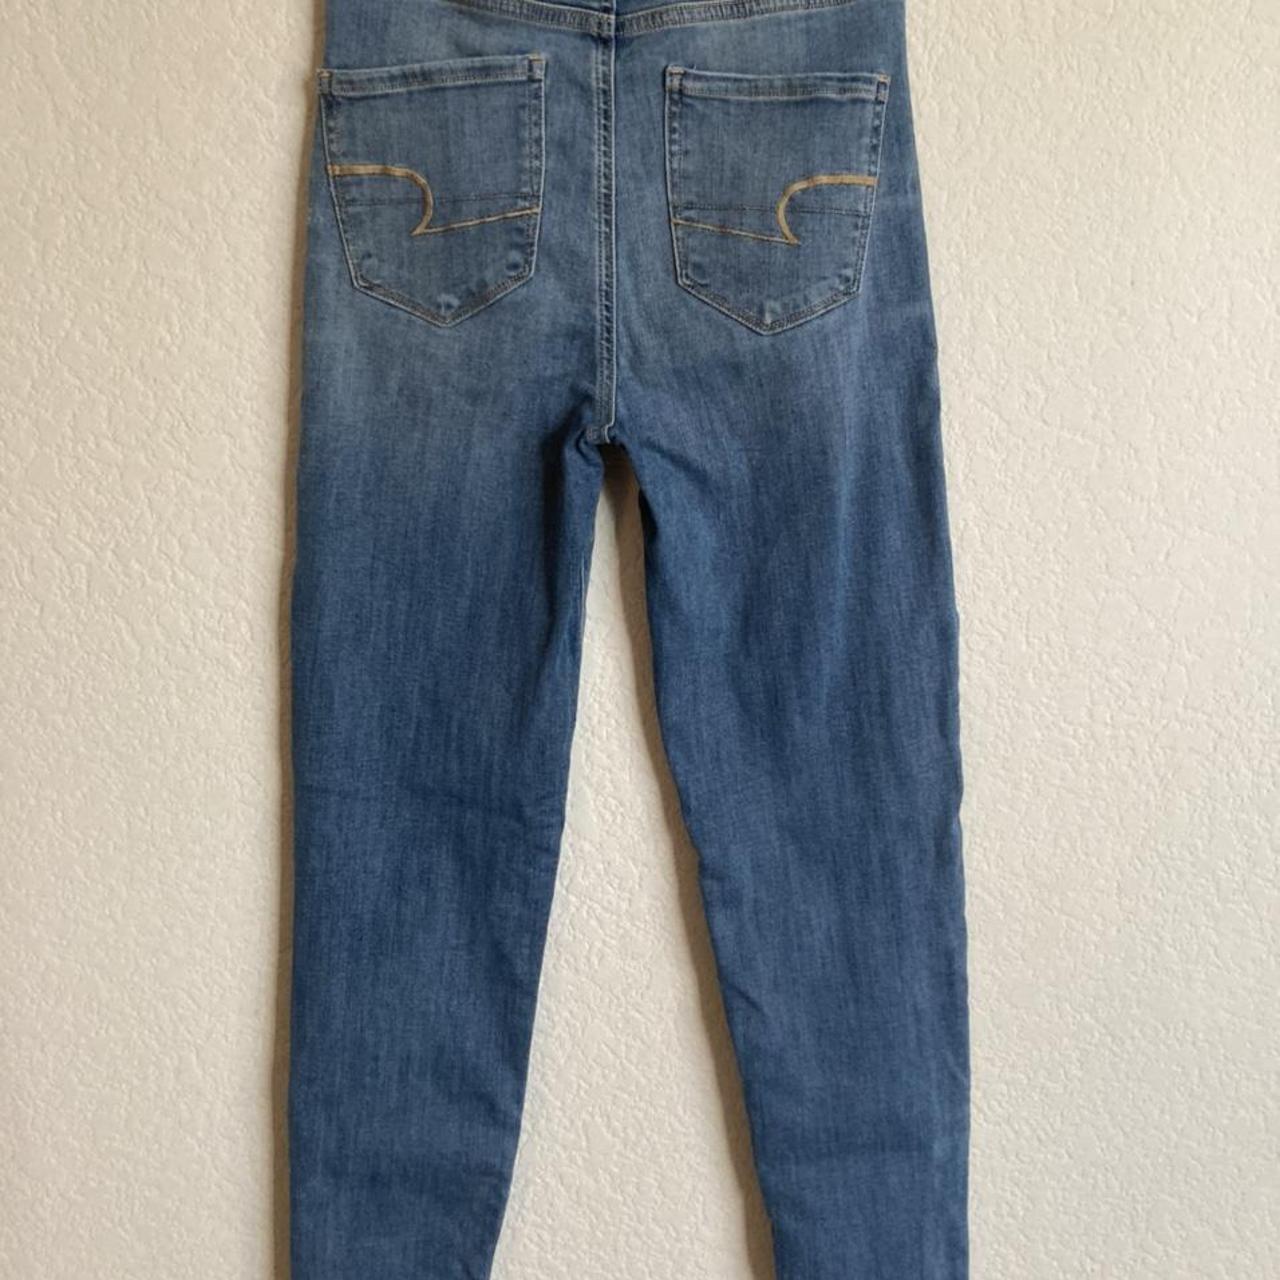 American Eagle Outfitters Women's Jeans | Depop